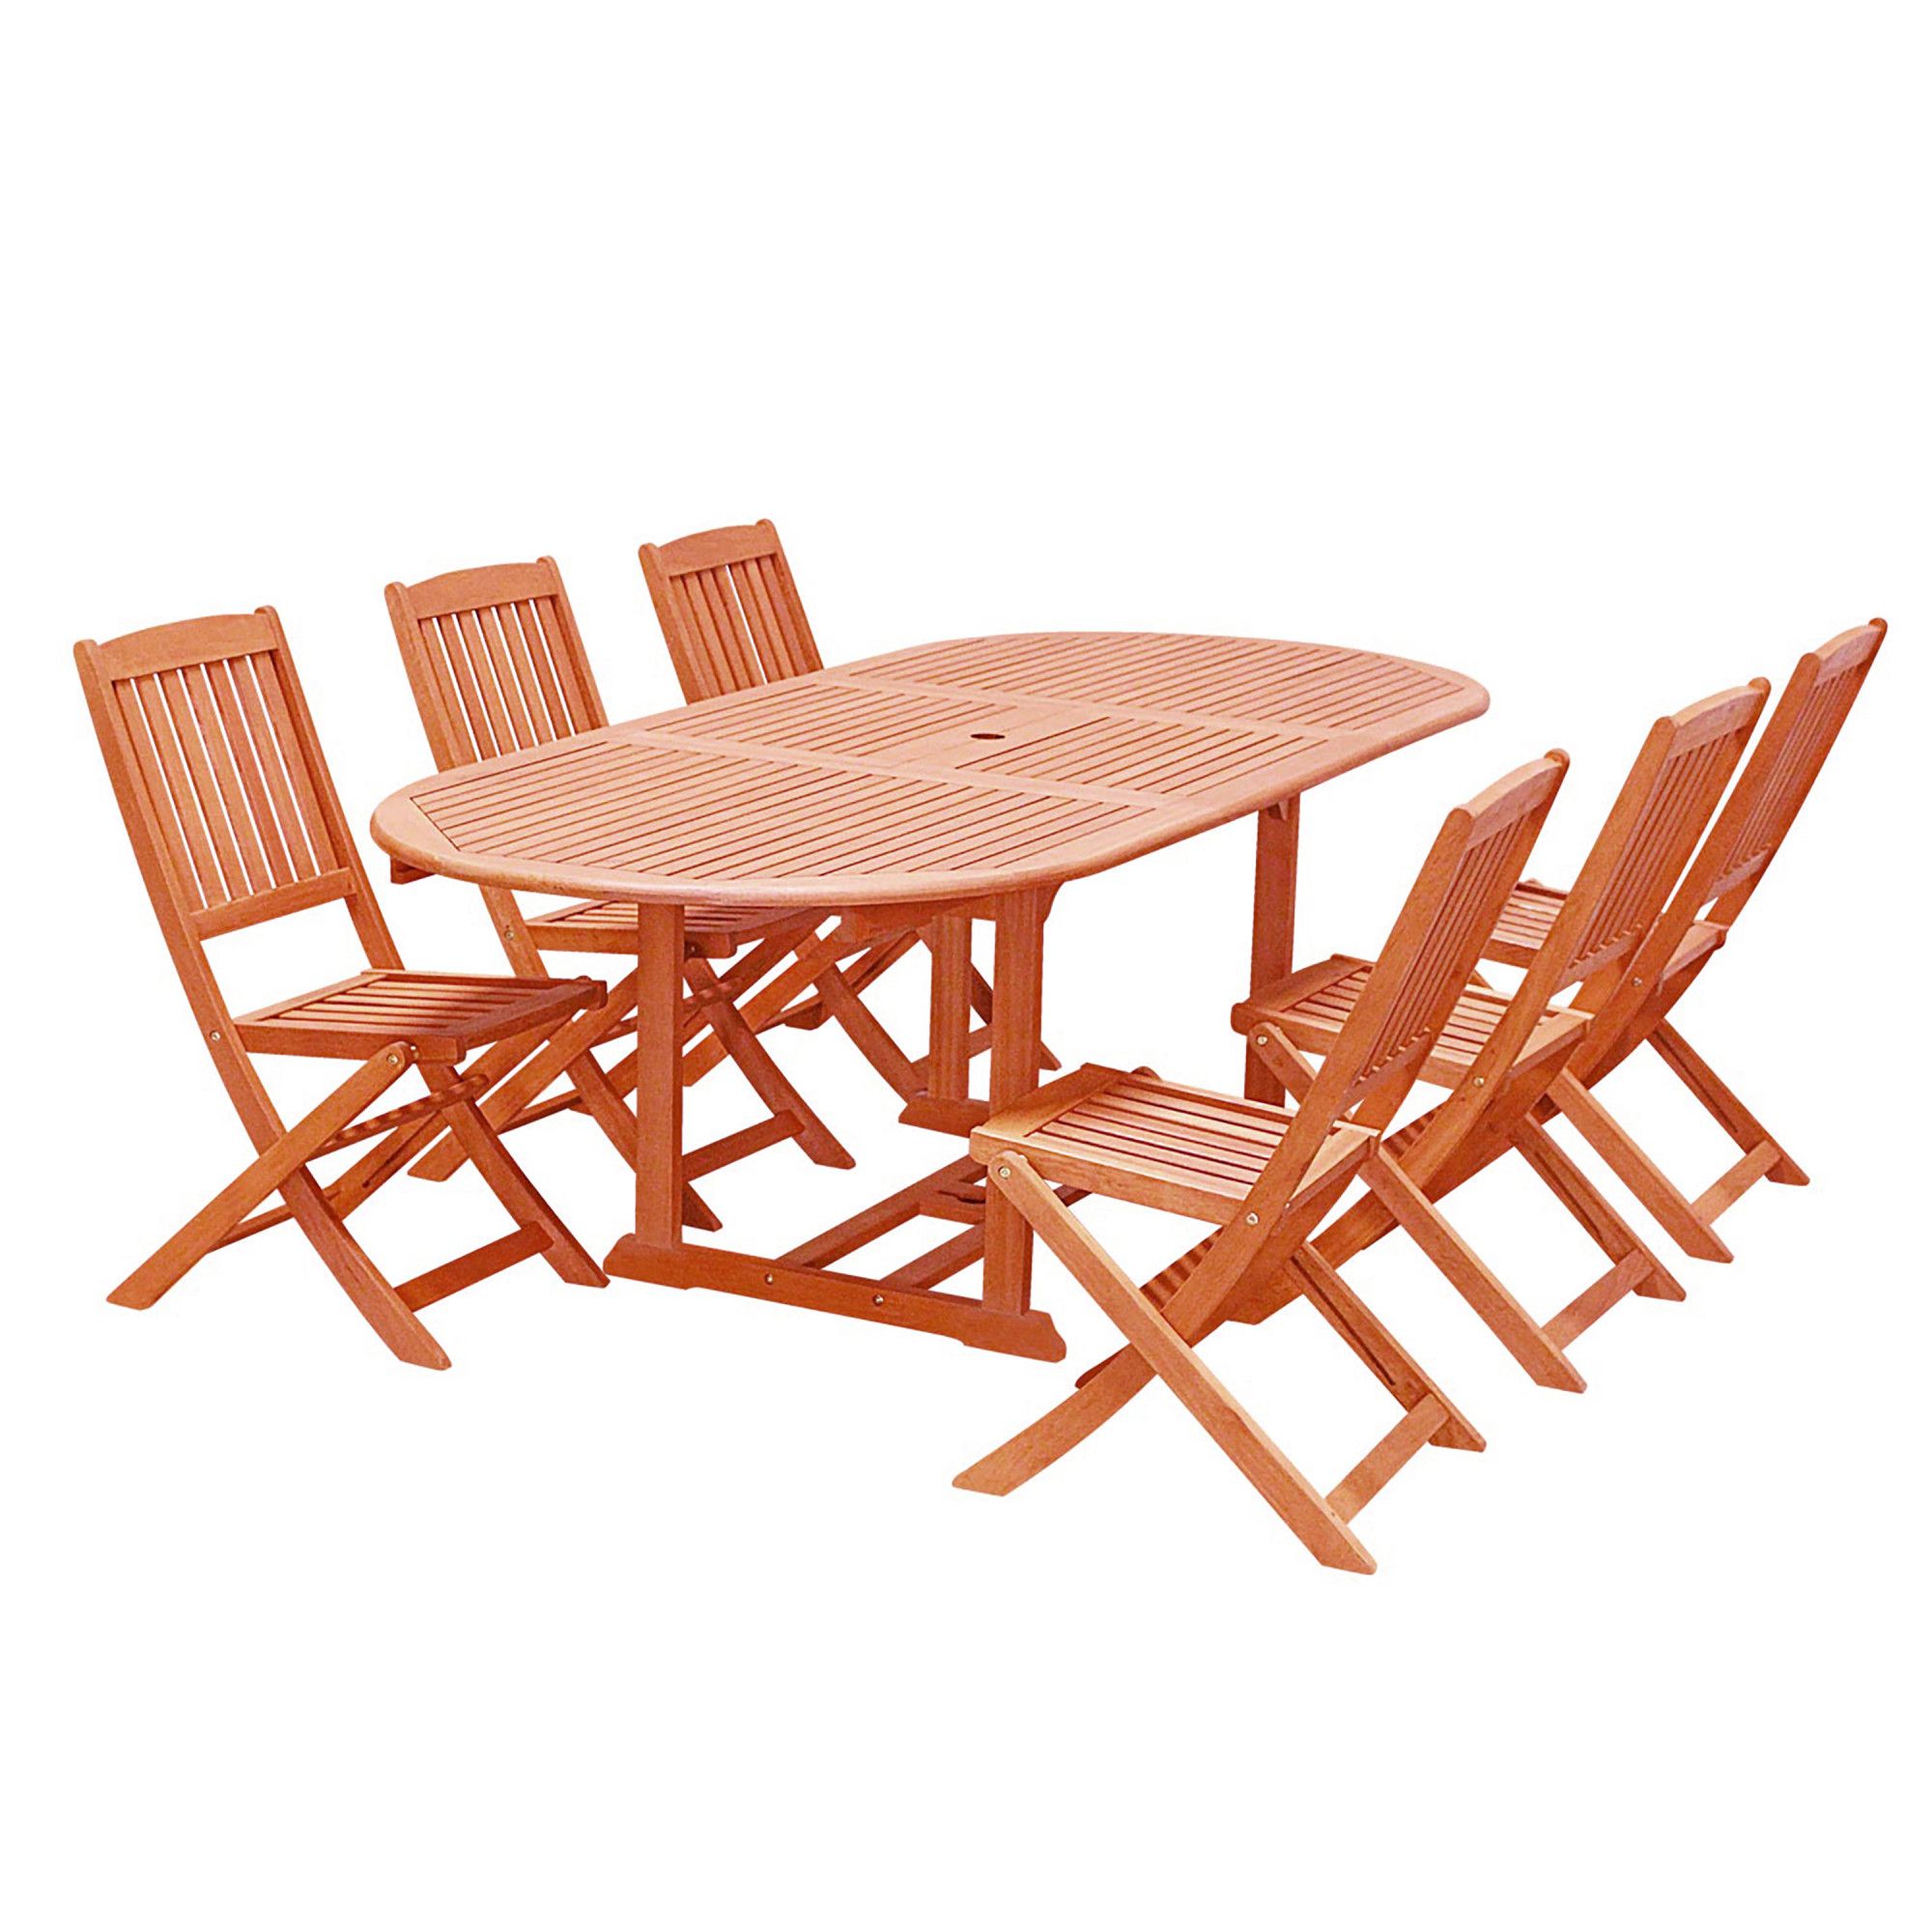 Malibu Outdoor 7 Piece Wood Patio Dining Set With Extension Table Regarding Extendable 7 Piece Patio Dining Sets (View 9 of 15)